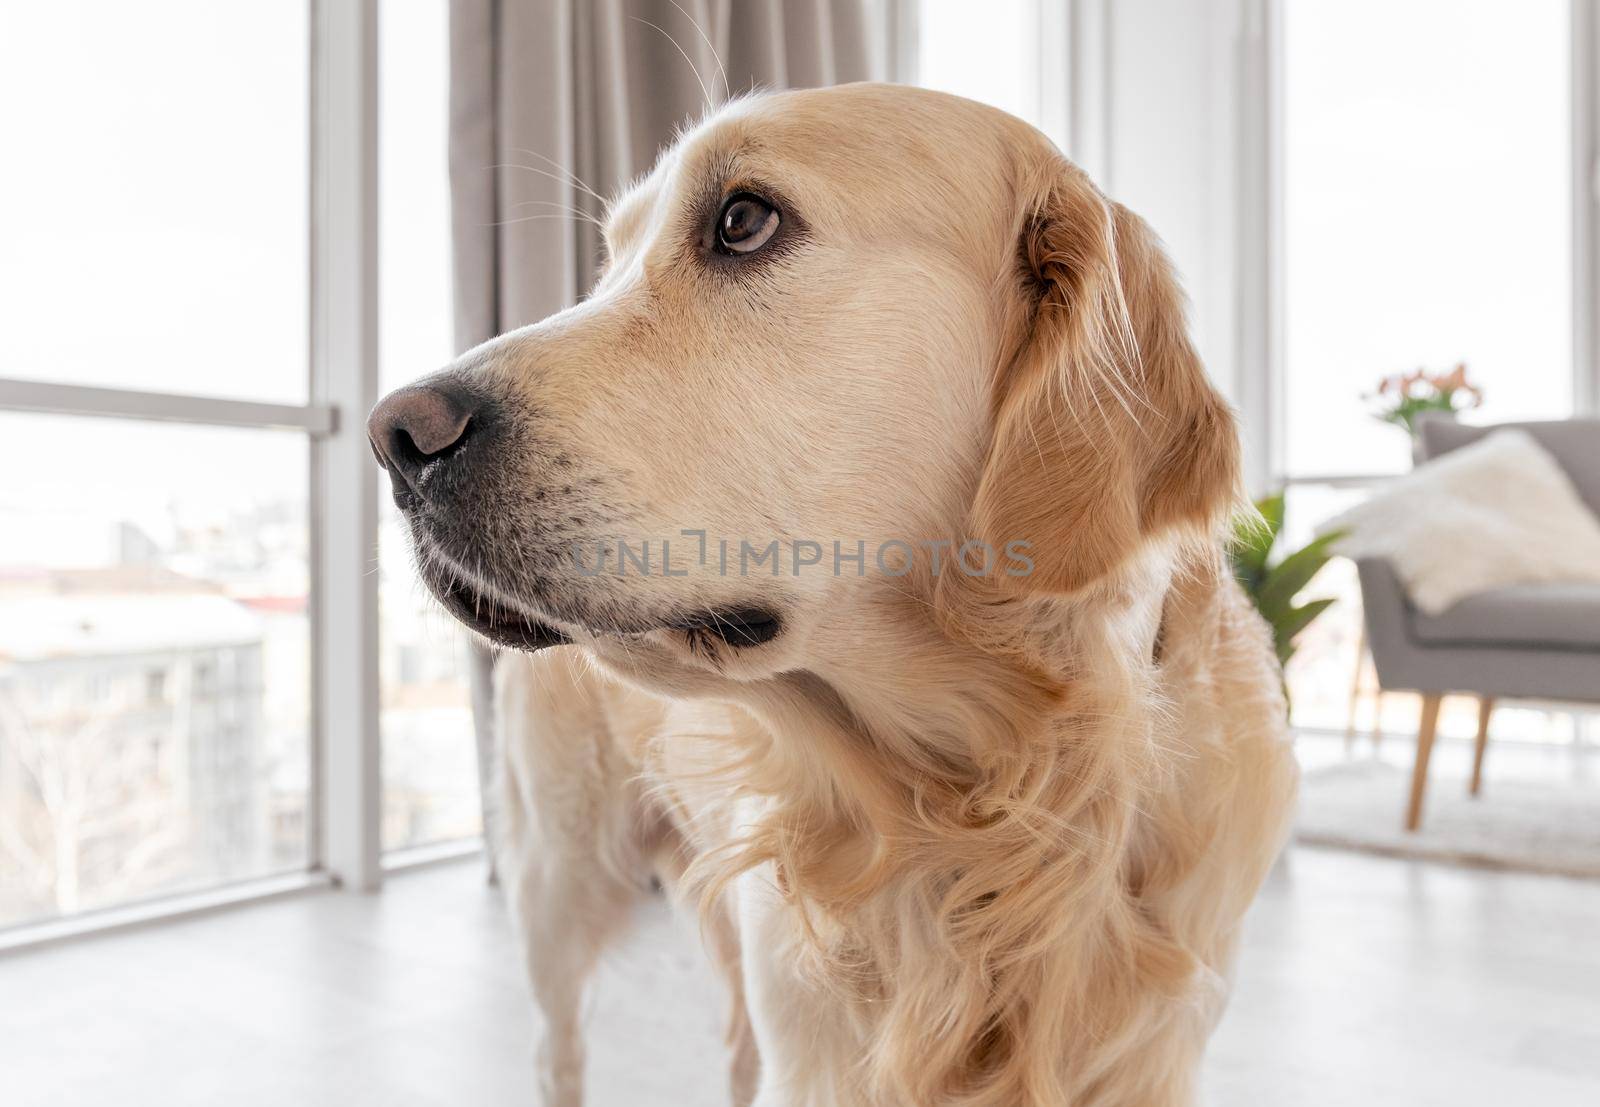 Golden retriever dog portrait at home interior. Doggy looking back